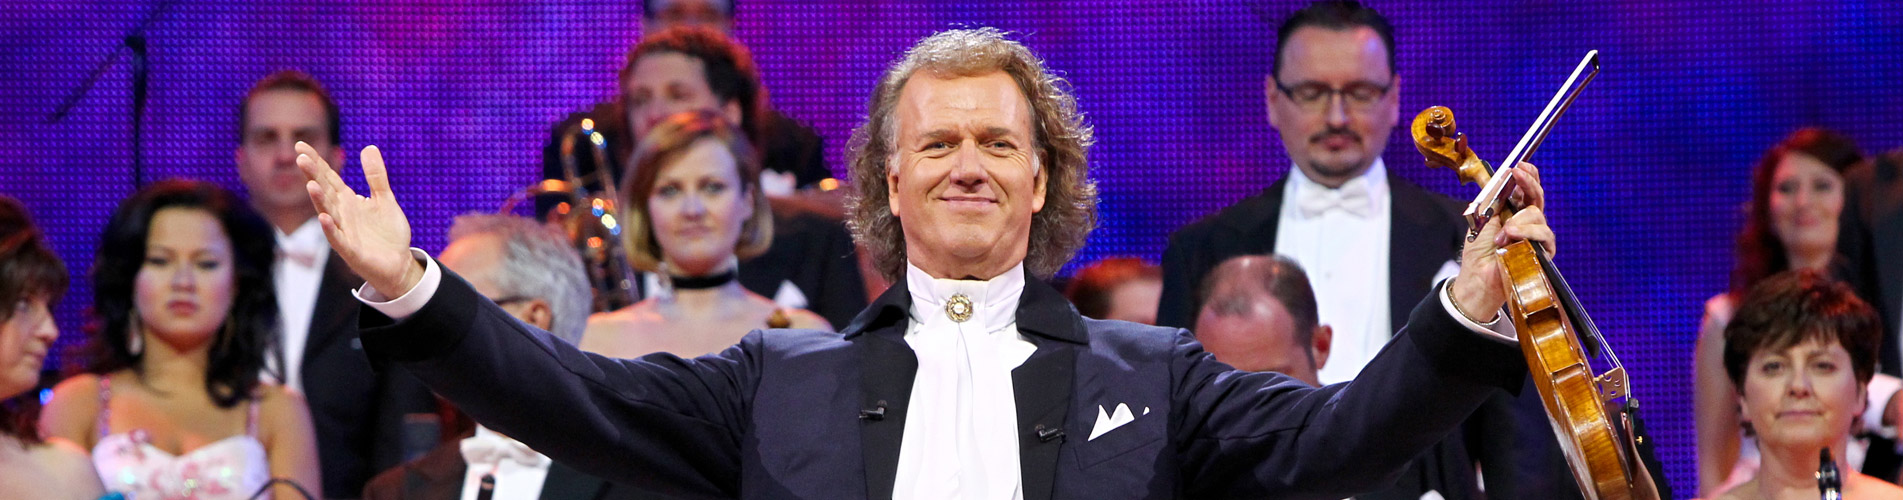 Andre Rieu in Maastricht by Air - 3 days